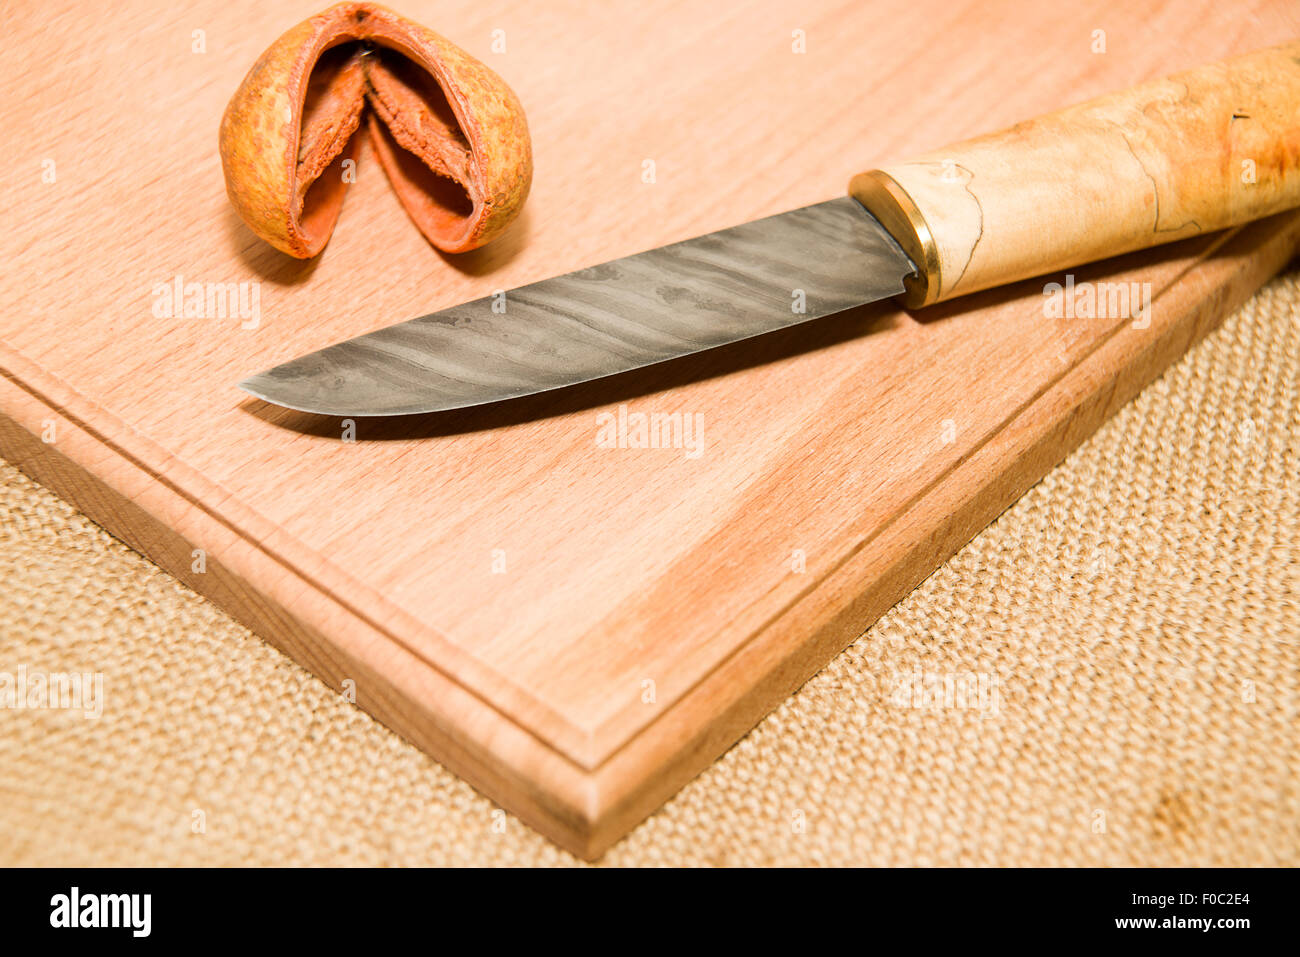 Honed is a hunting knife on a wooden surface Stock Photo